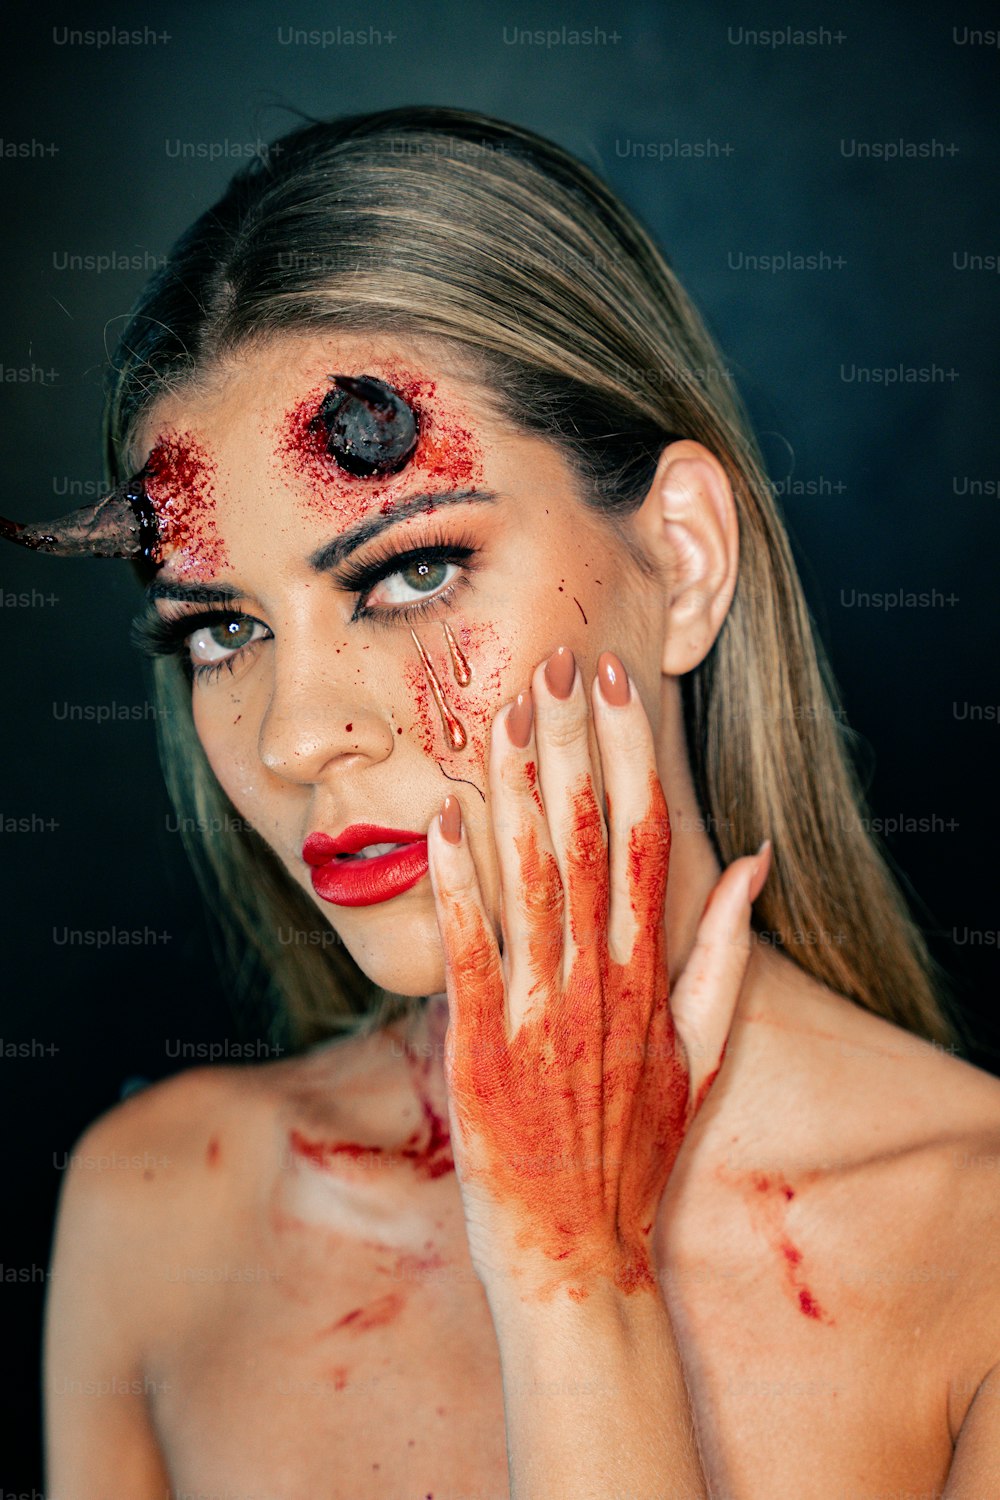 a woman with blood all over her face and hands